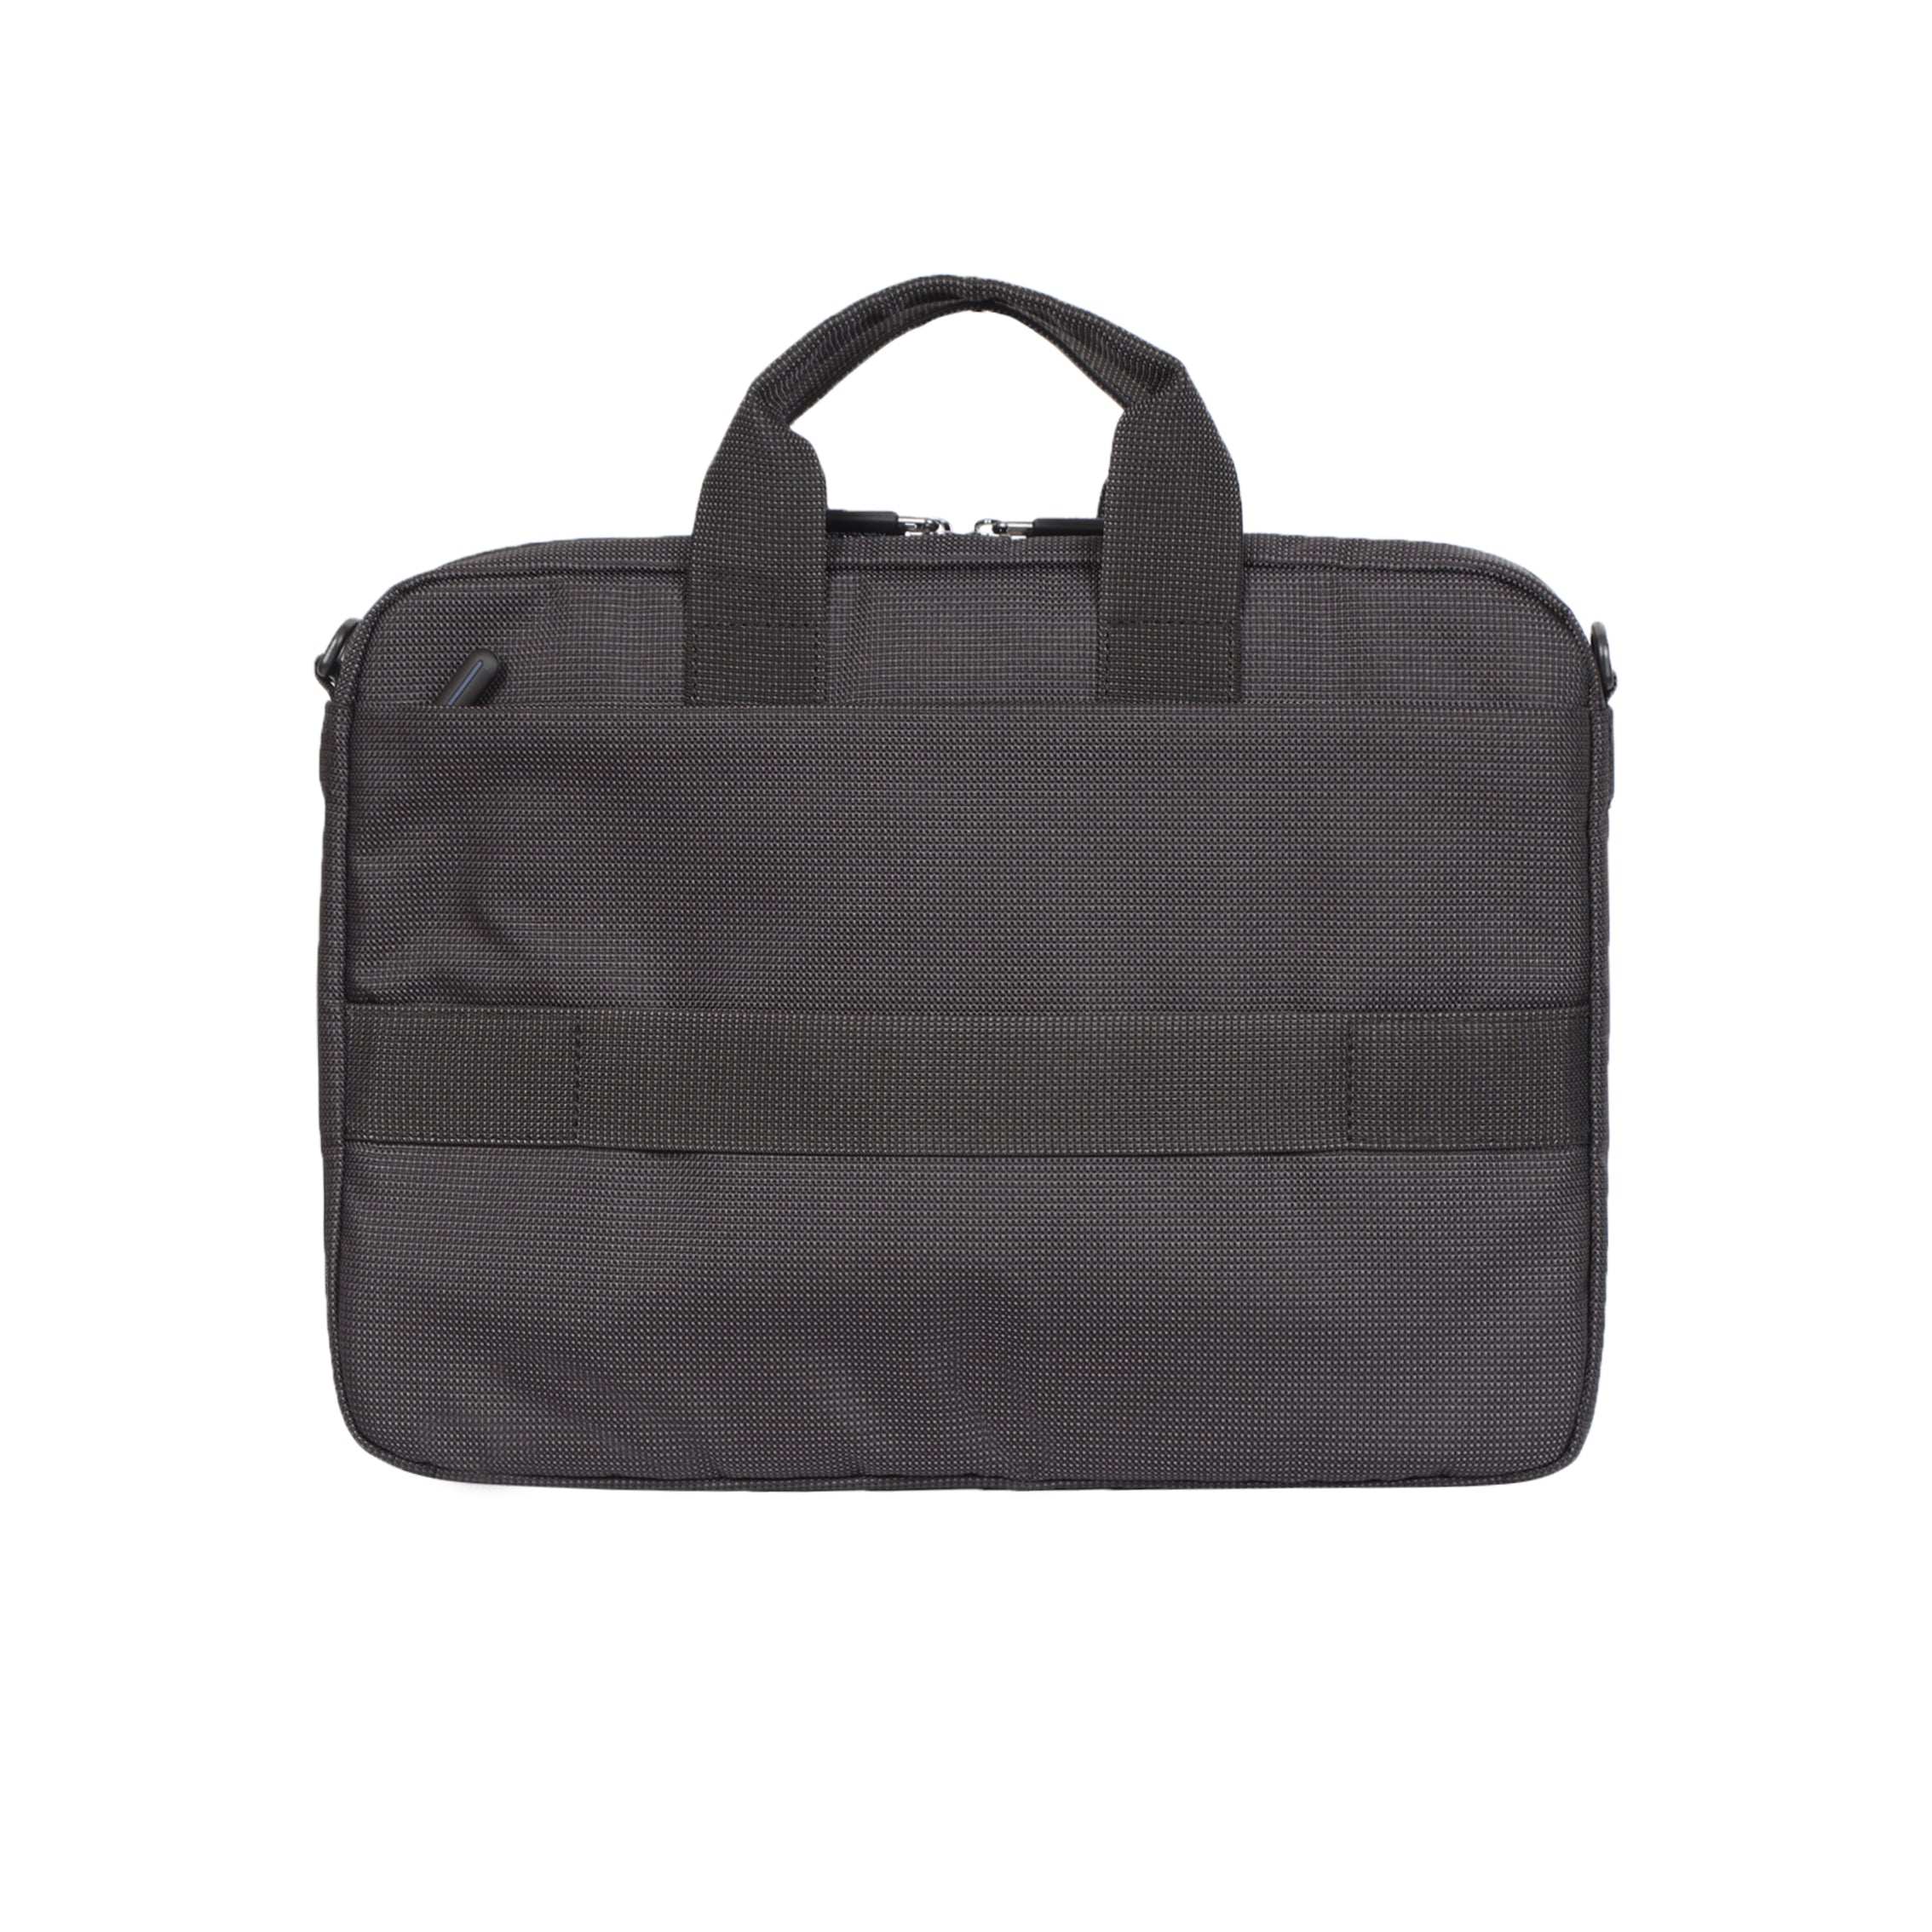 Waxed Canvas Briefcase | Bags & Totes at L.L.Bean